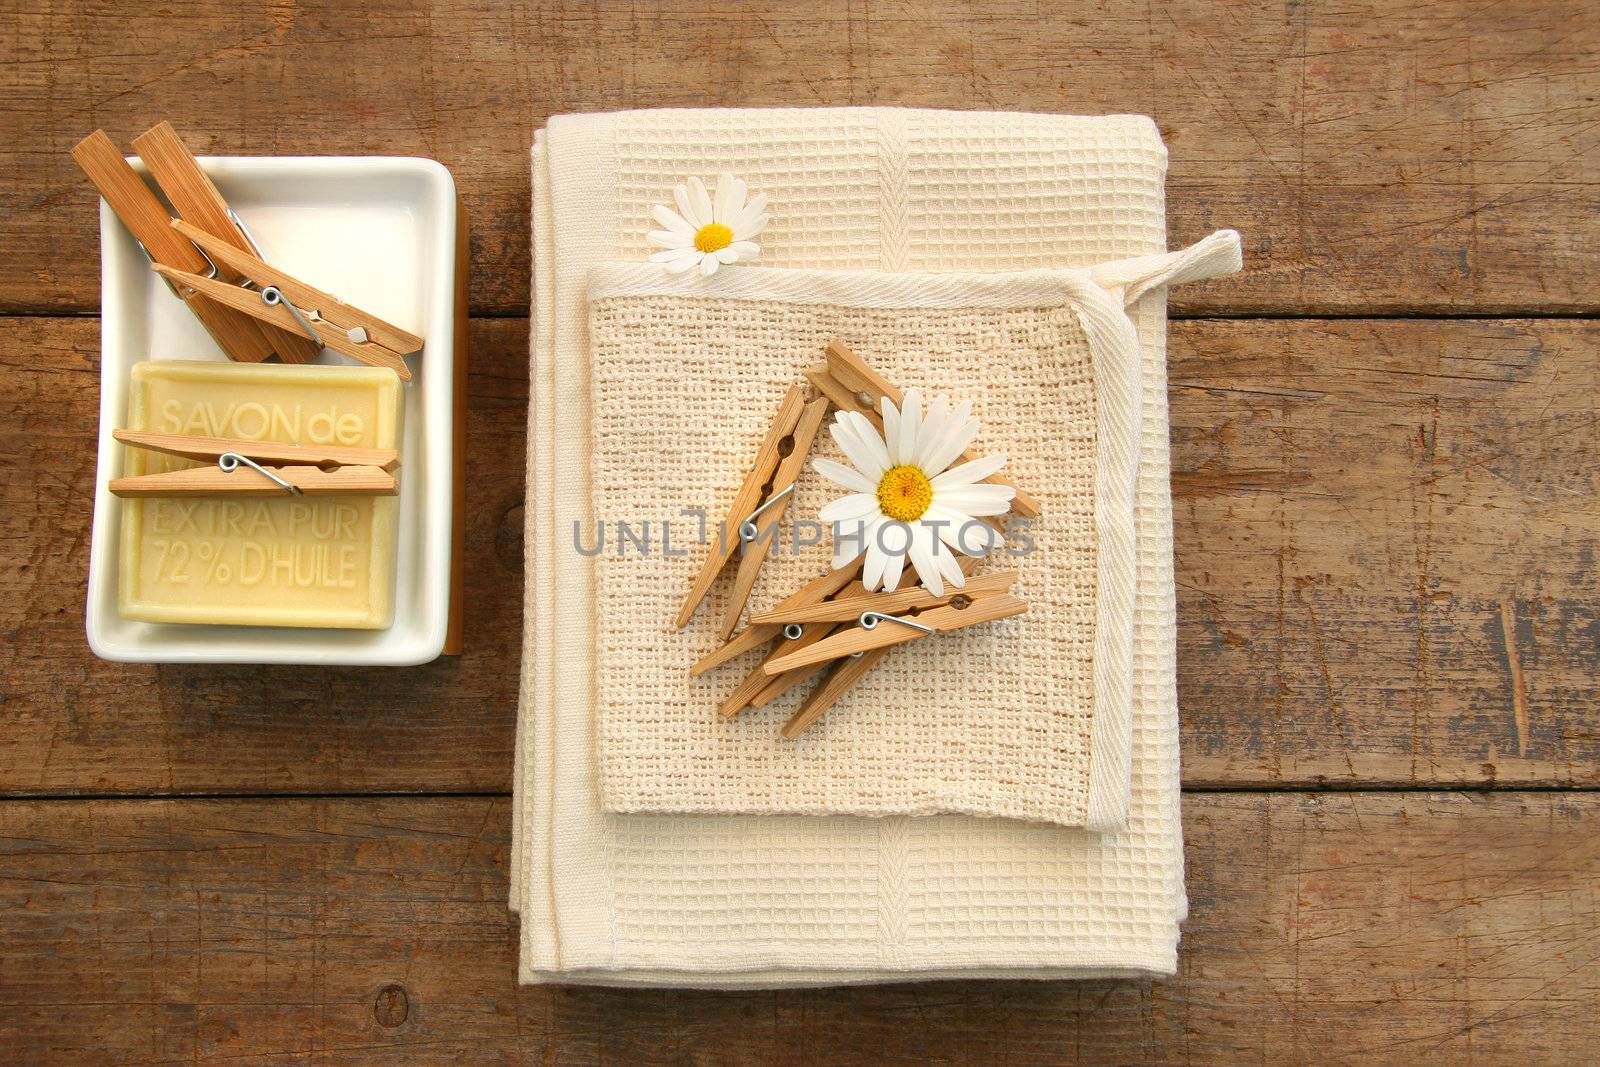 Soap, clothespins and towels  by Sandralise